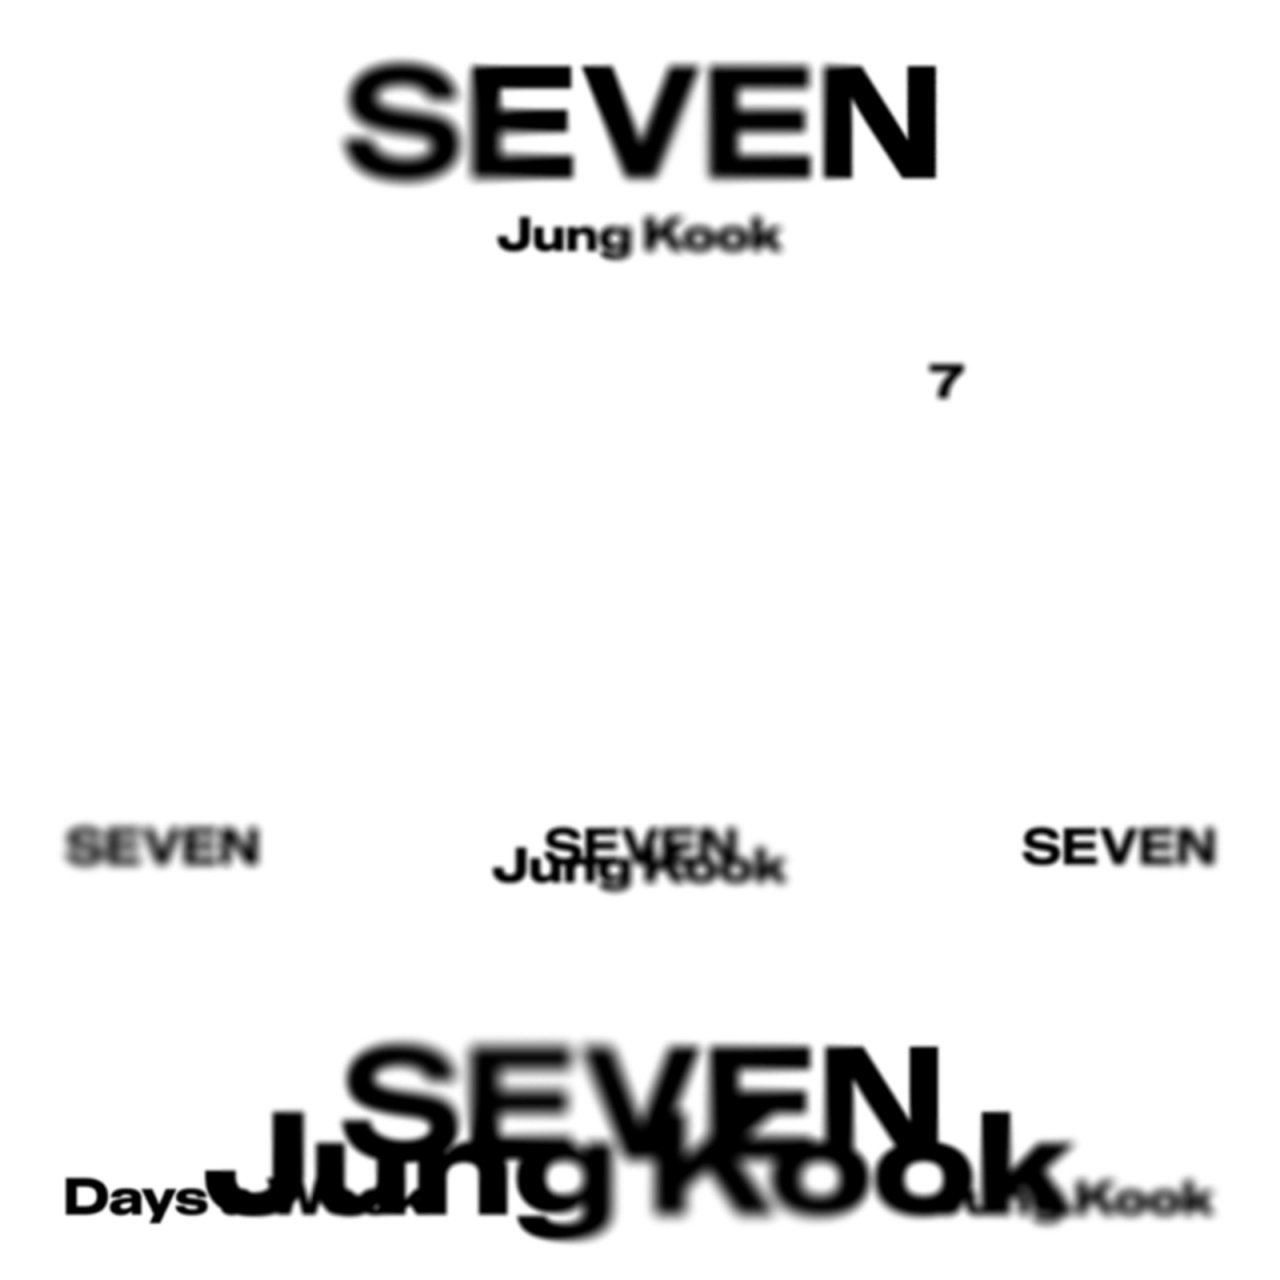 The cover of Jungkook's digital single 'Seven' to drop on July 14 (Big Hit Music)